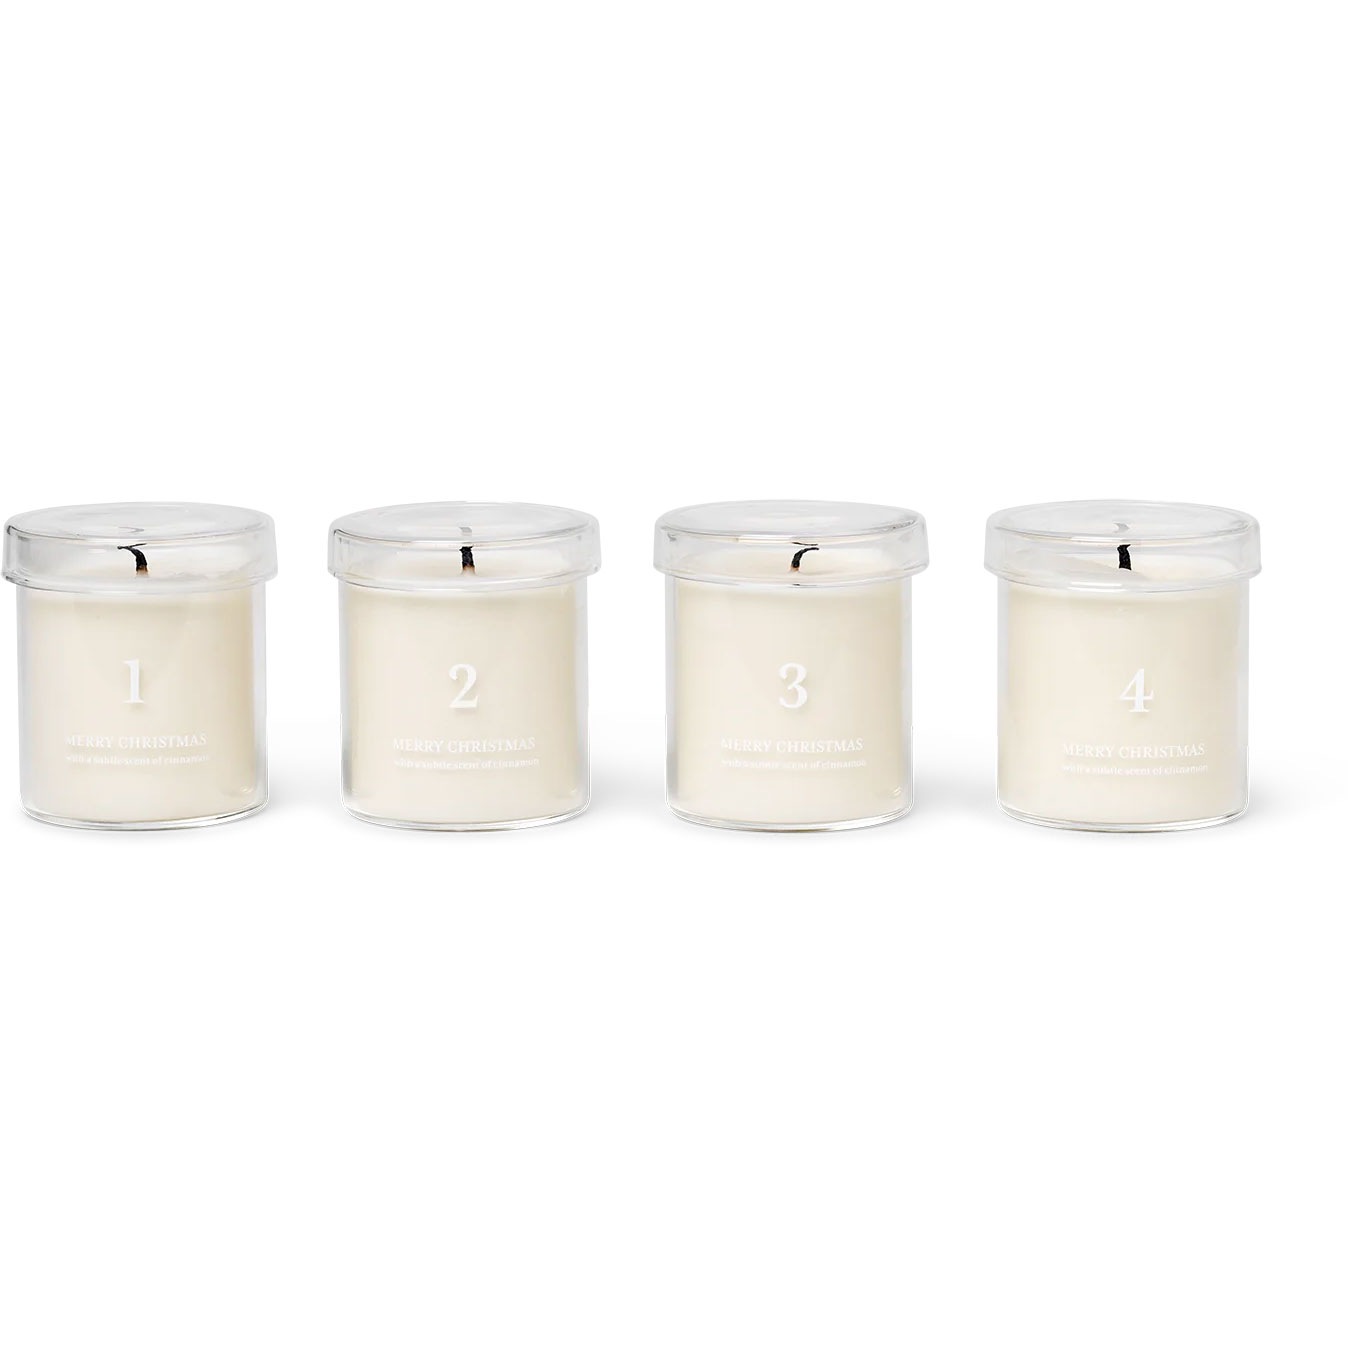 Scented Advent candles 4-pack, White